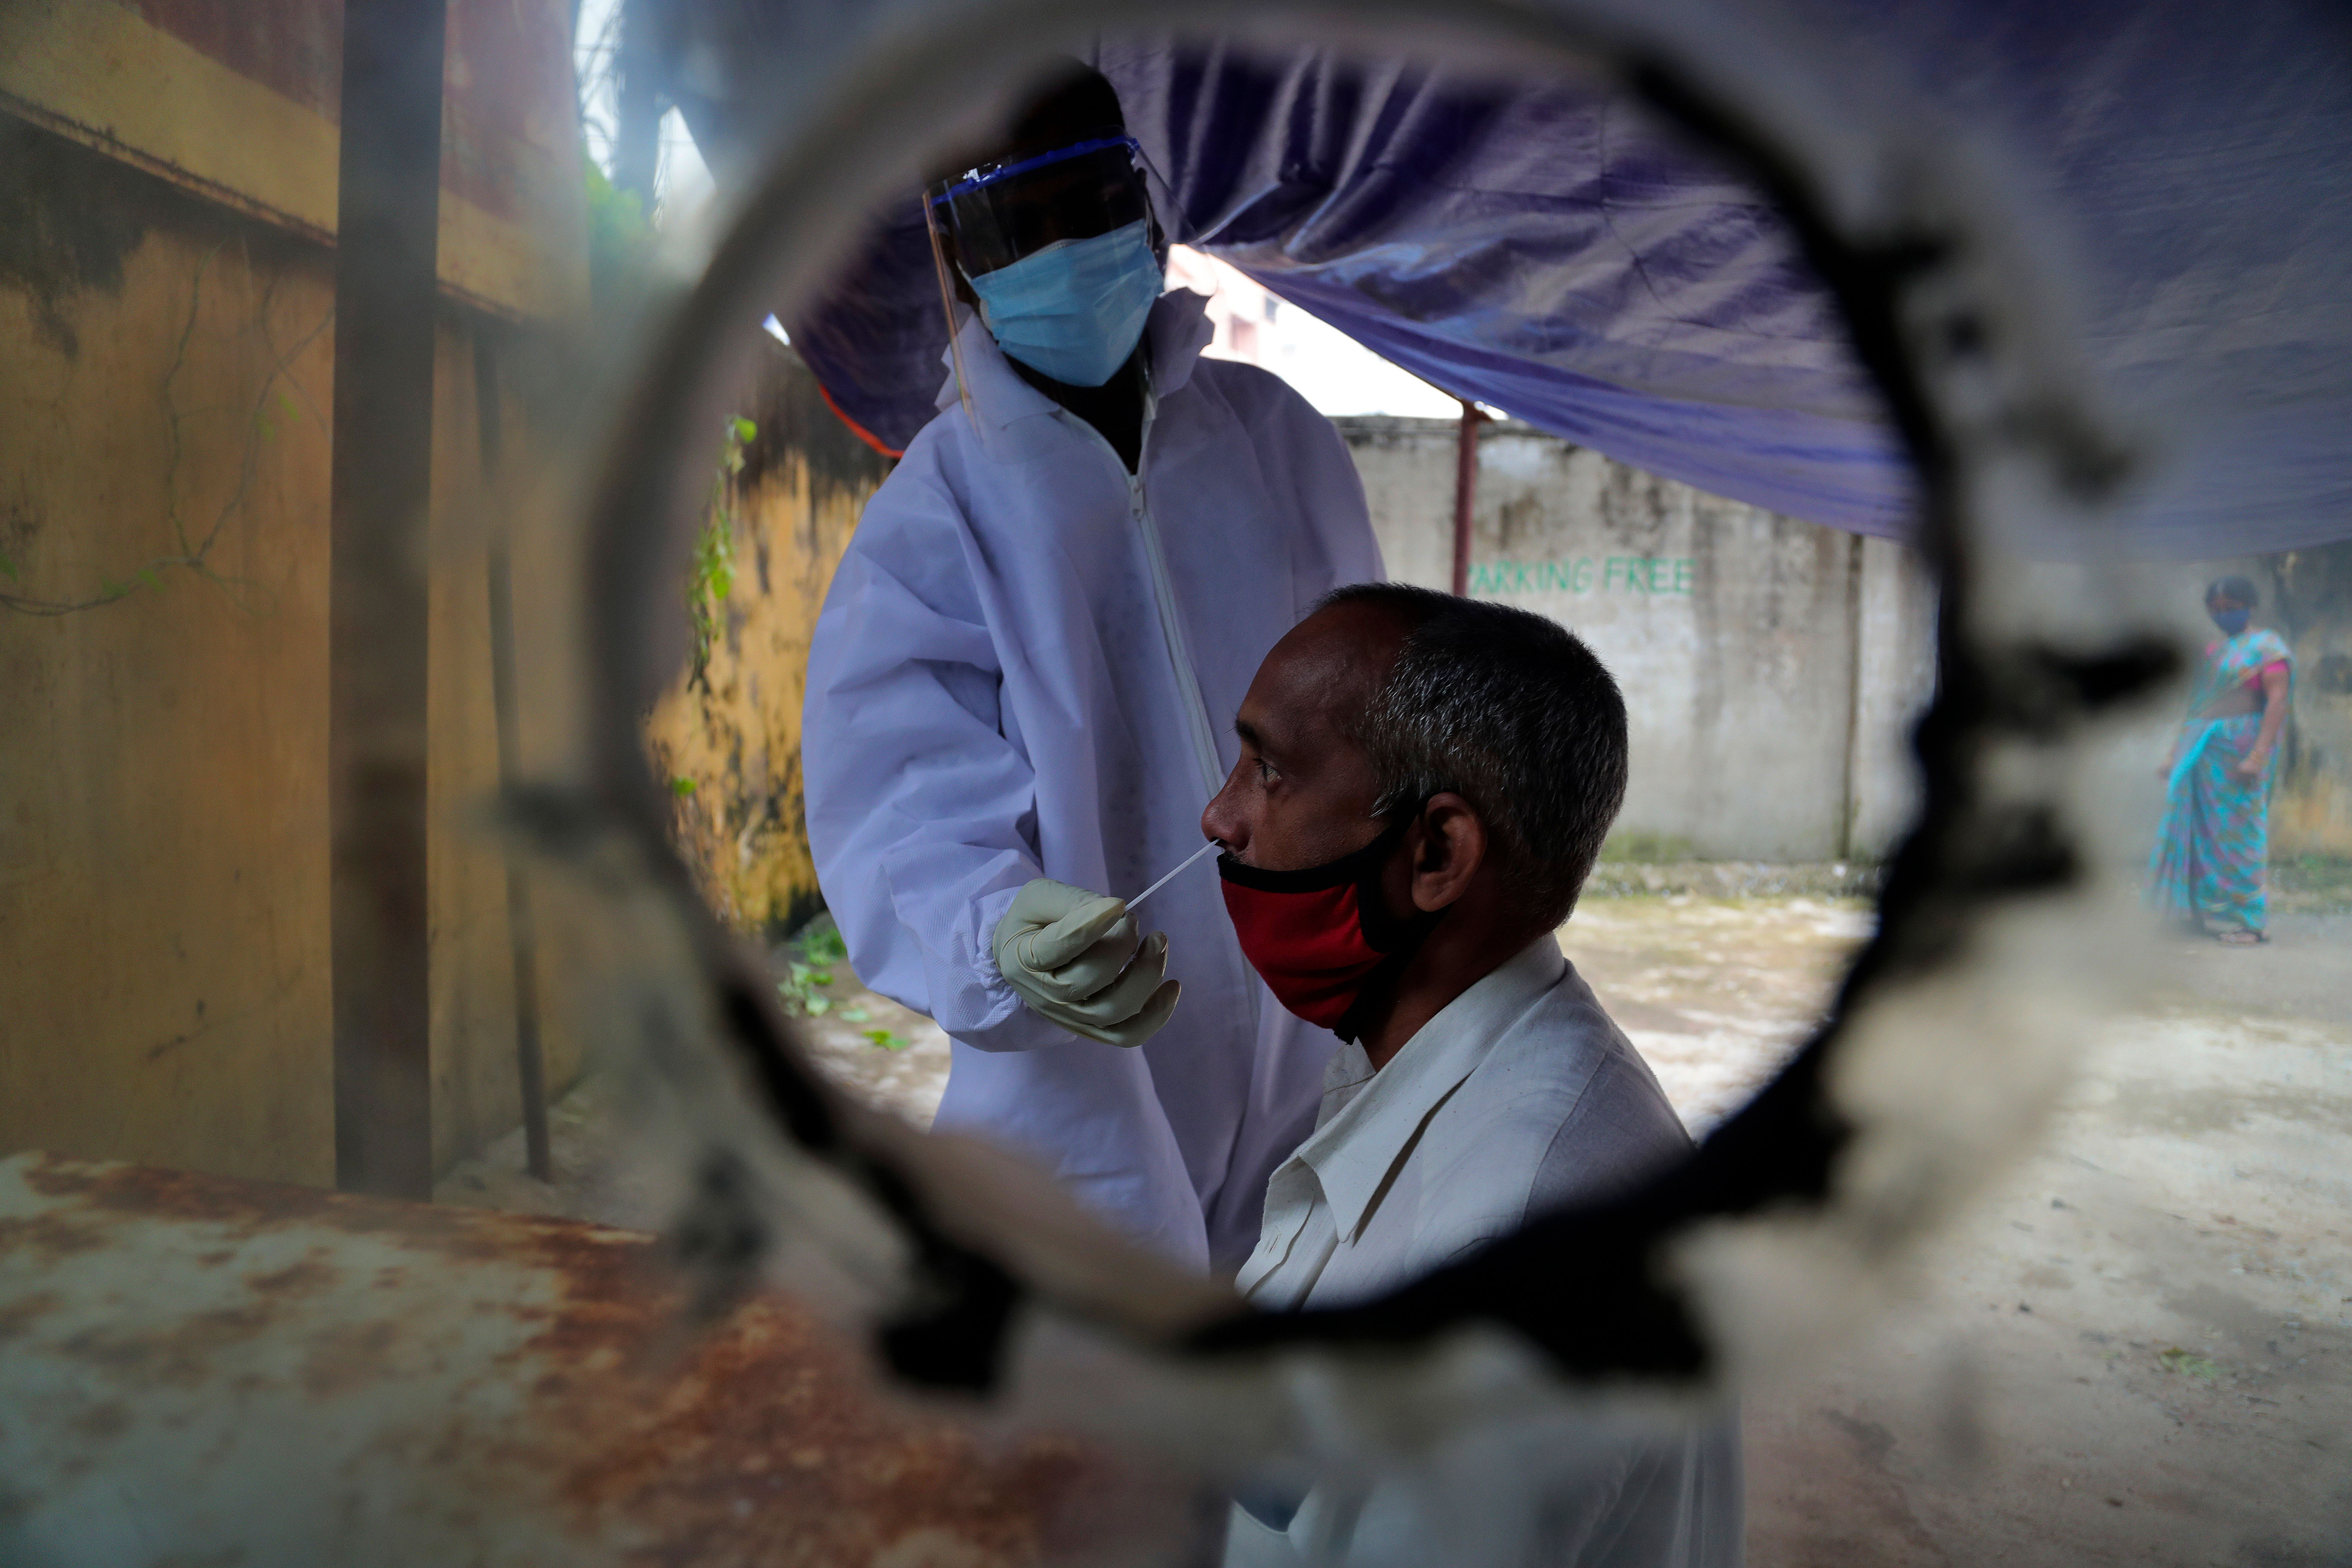 A health worker collects a nasal swab to test for Covid-19 in Hyderabad, India, on October 20.